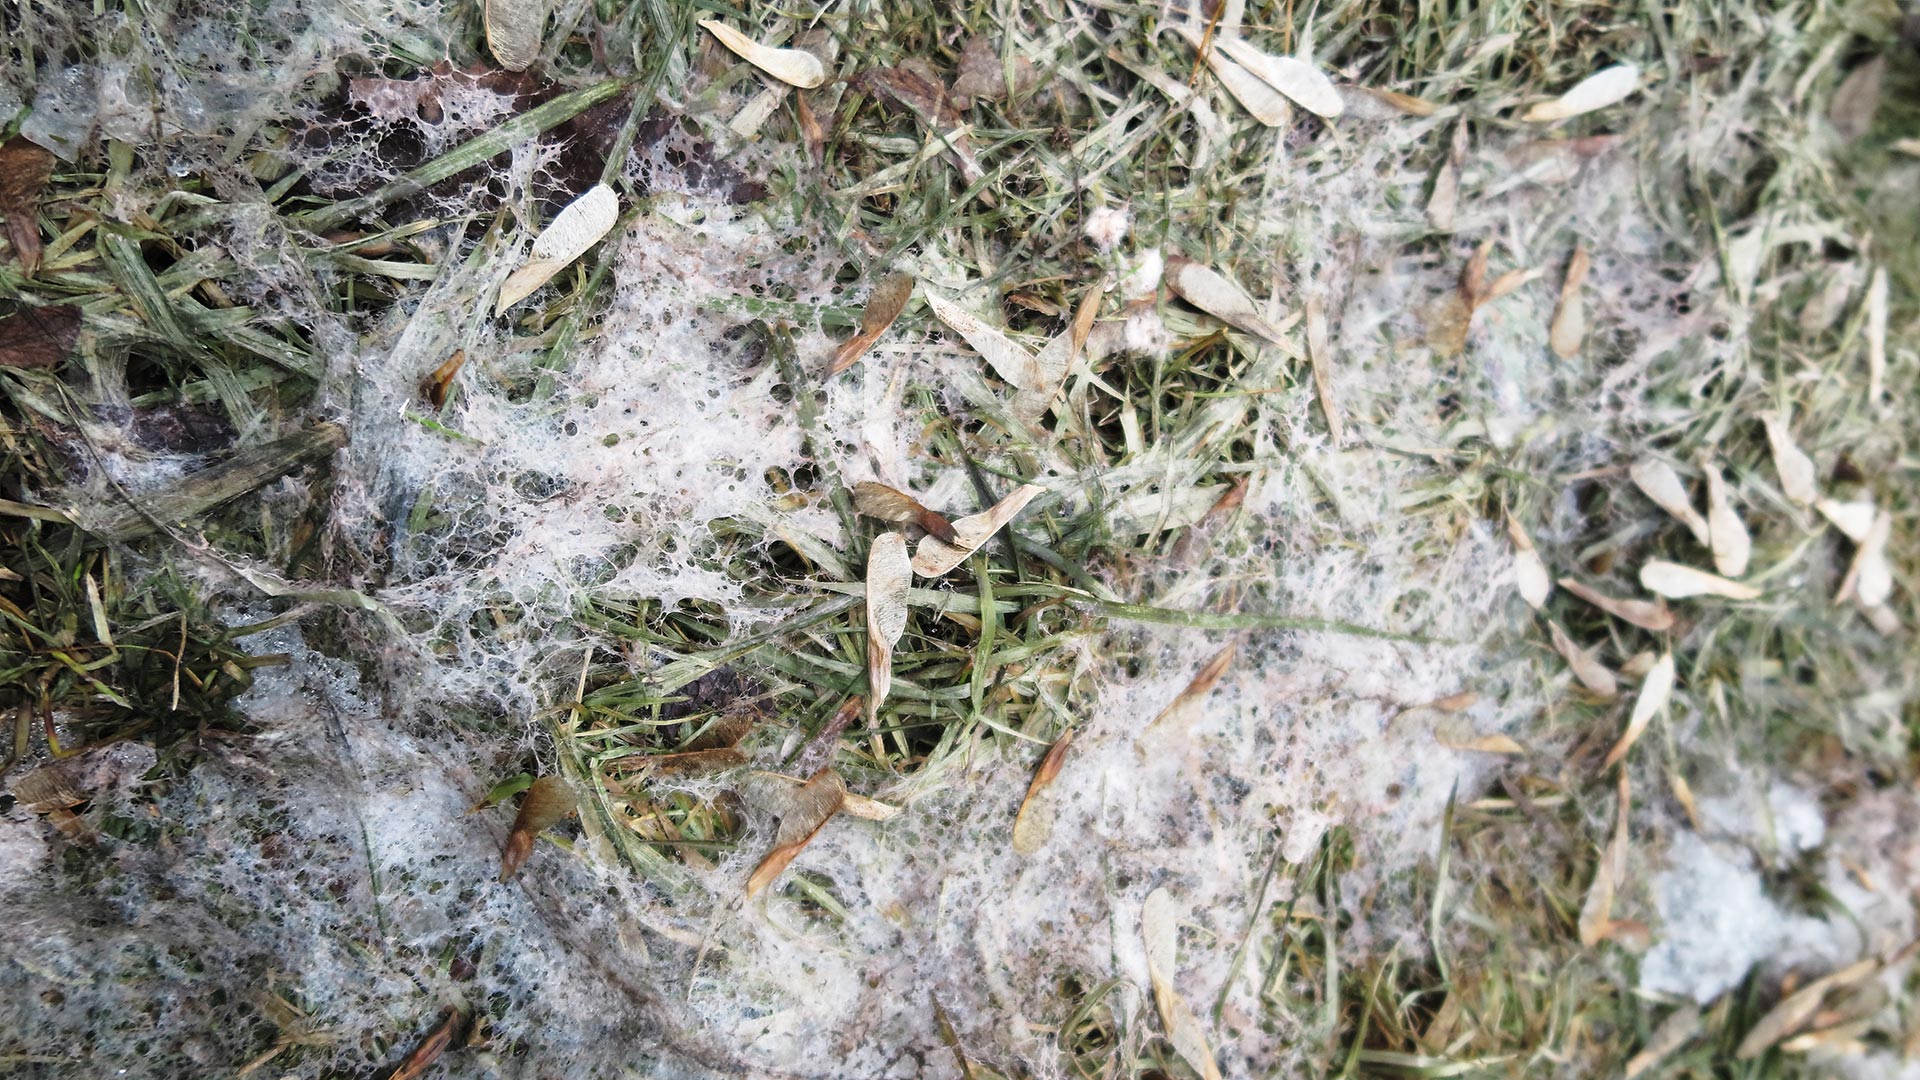 Did Your Lawn Surprise You With Snow Mold This Year? Here's What to Do